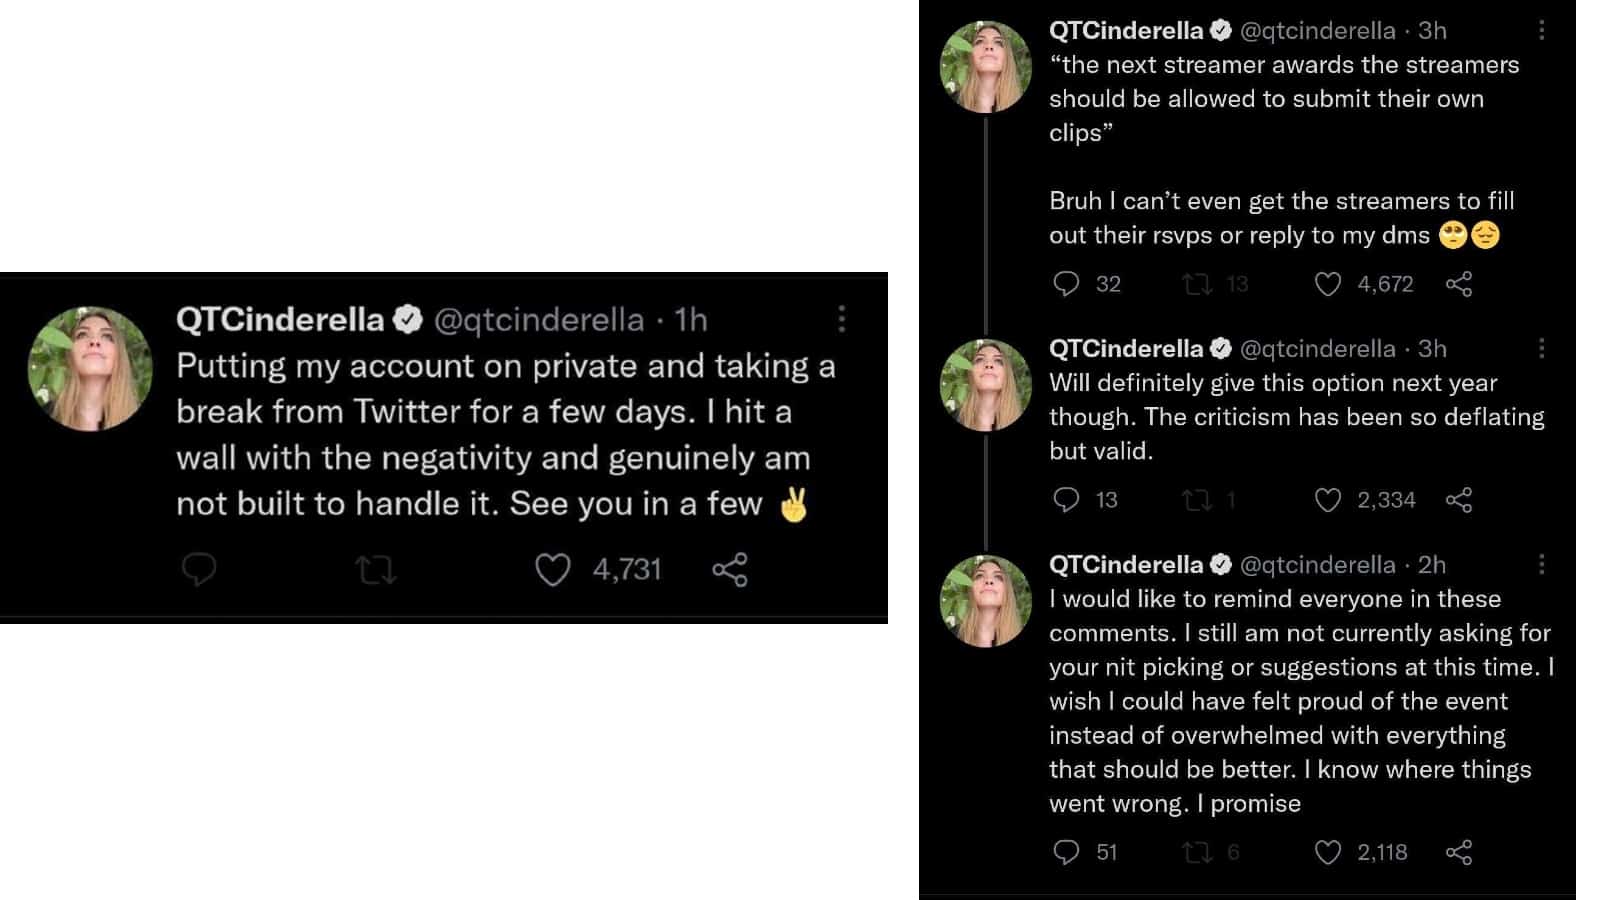 These are incredible stats!: Twitter lauds QTCinderella after she reveals  Streamer Awards viewership numbers